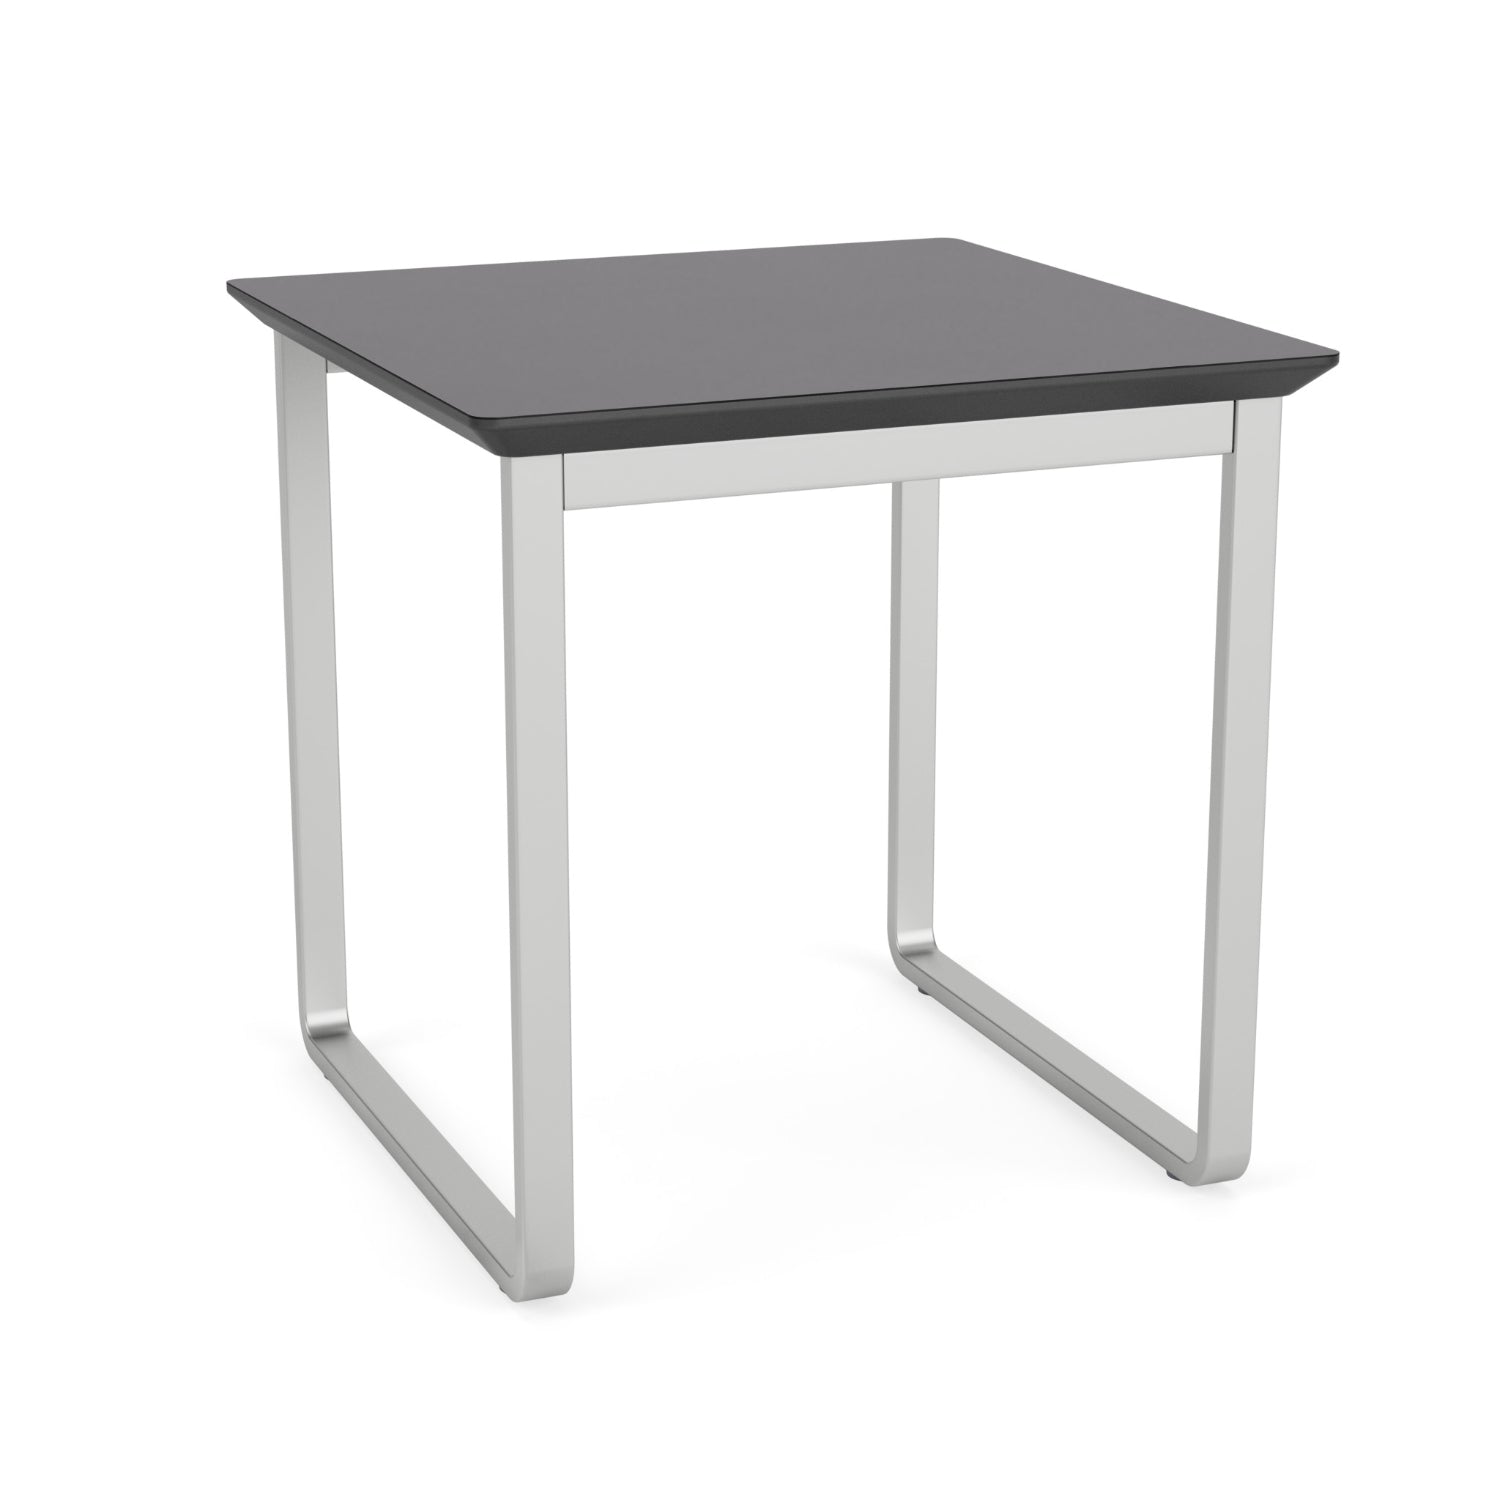 Gansett Collection End Table with Laminate Top, FREE SHIPPING